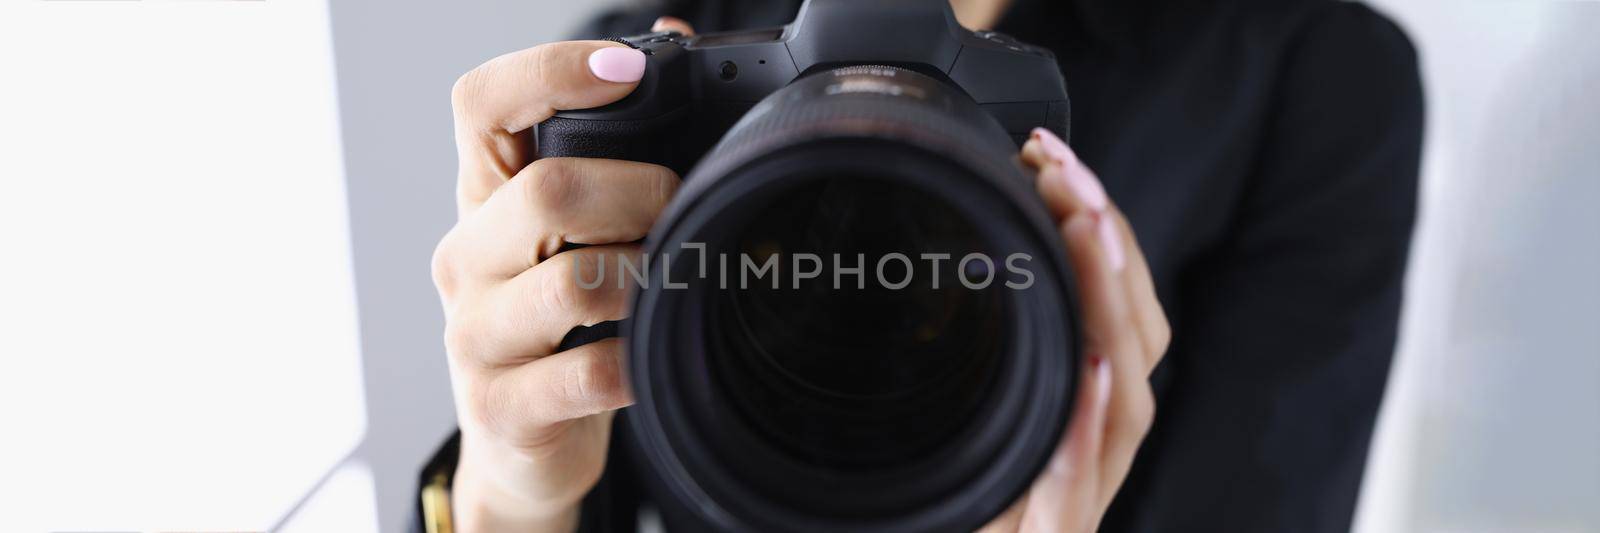 Professional woman photographer hold last model of photocamera by kuprevich